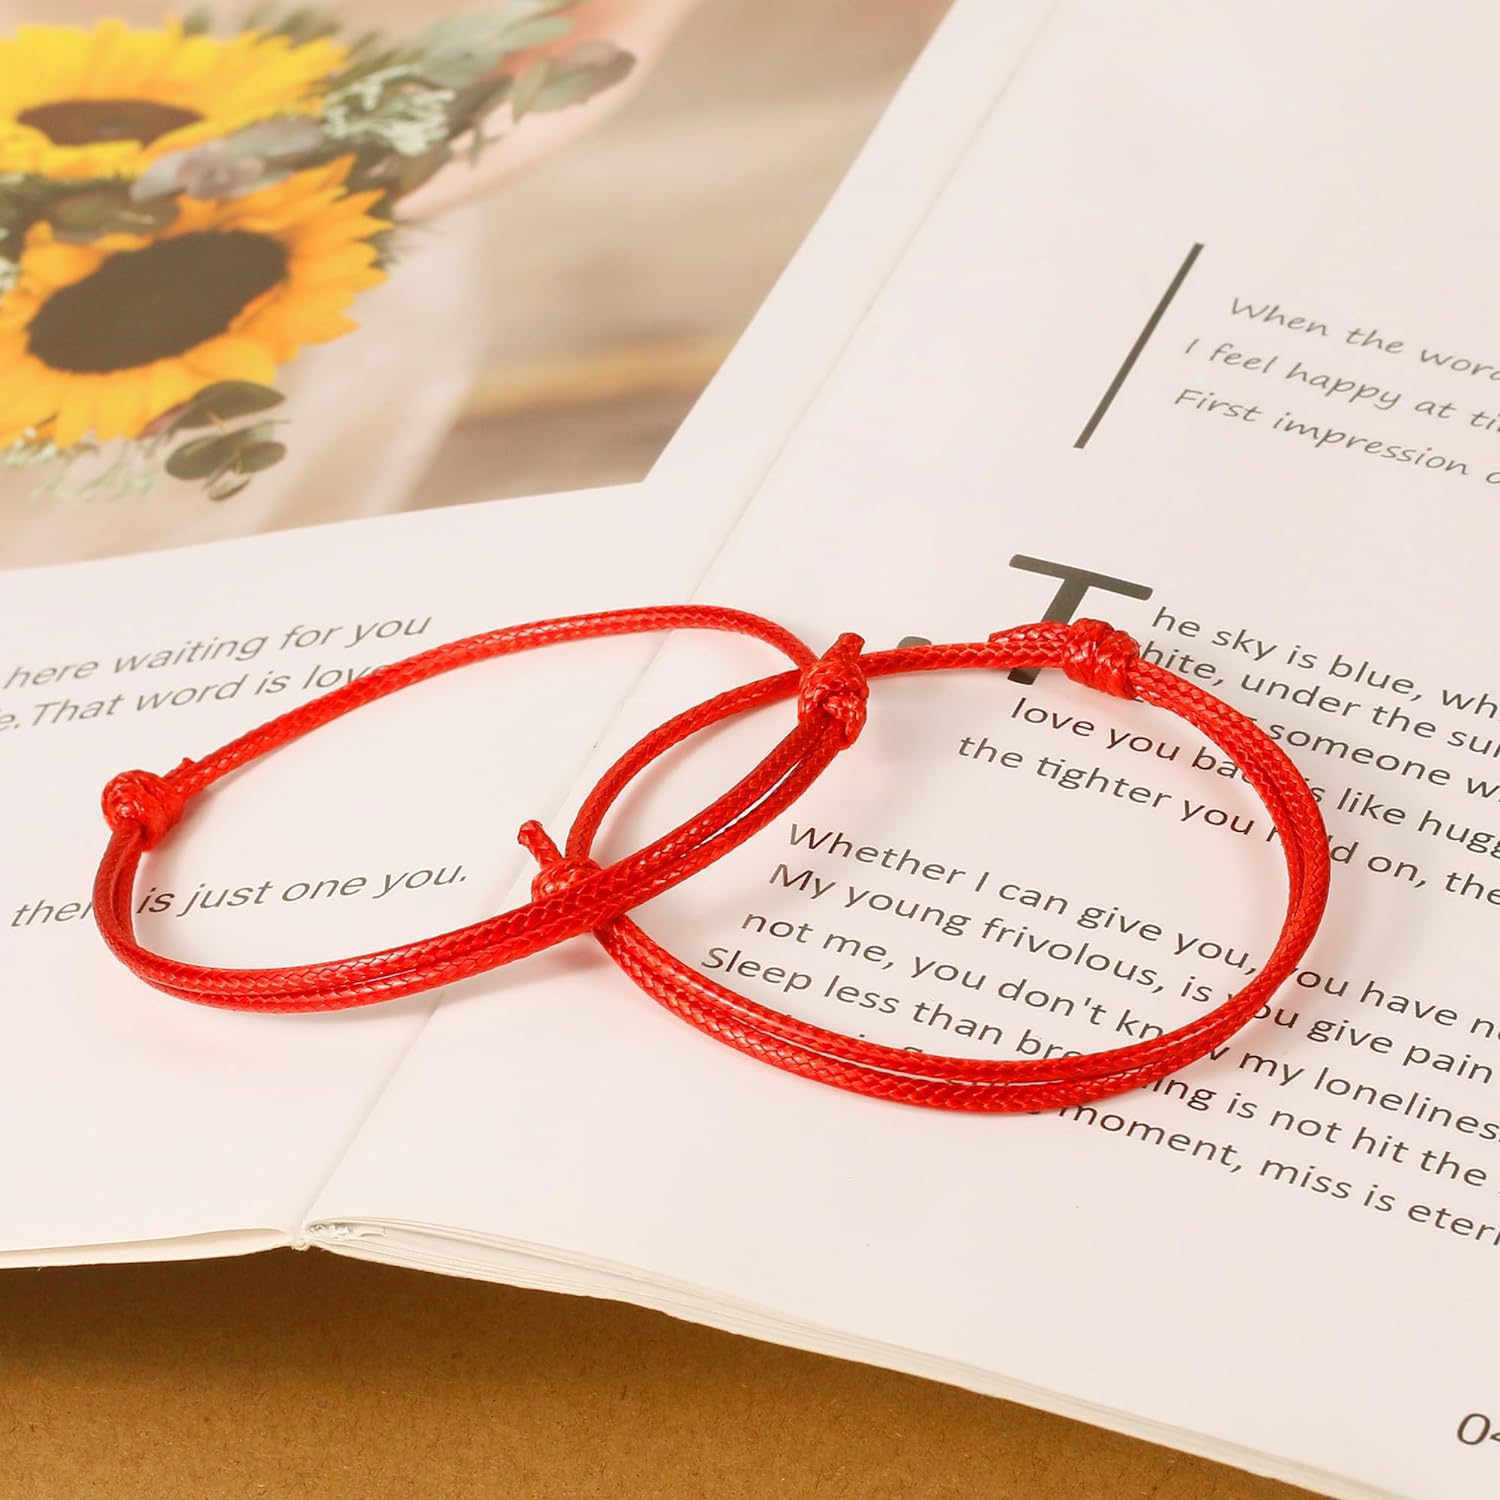 SmileBelle Red String of Fate Bracelets, Valentines Day Gifts for Him Matching Bracelets Couples Gift Red Bracelets for Her Good Luck Long Distance Anniversary Boyfriend Girlfriend Valentine Jewelry